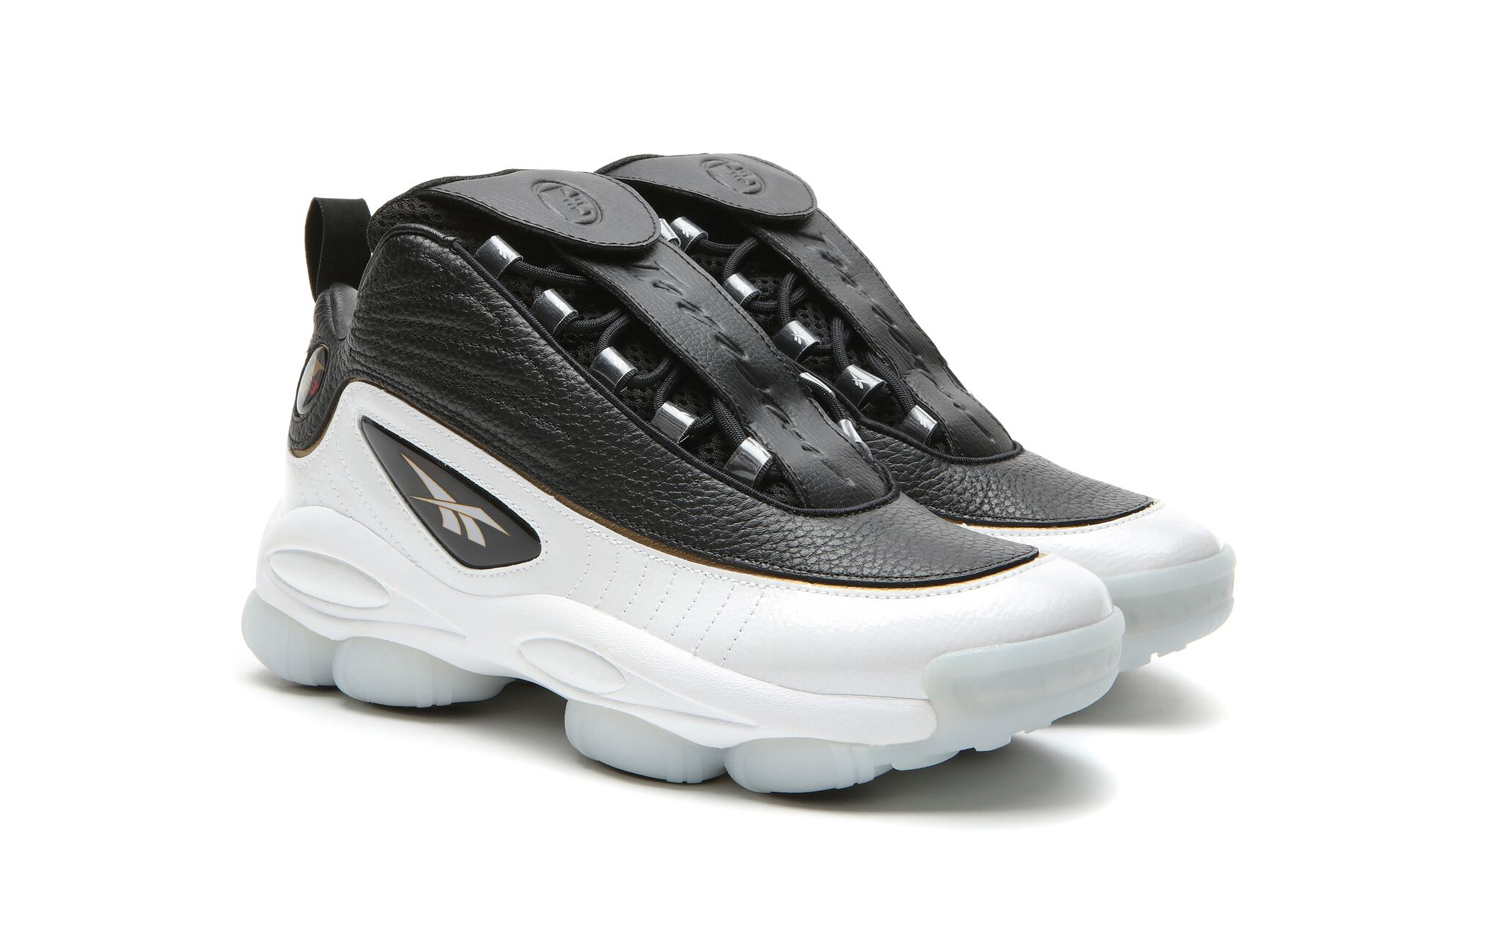 the new iverson shoes